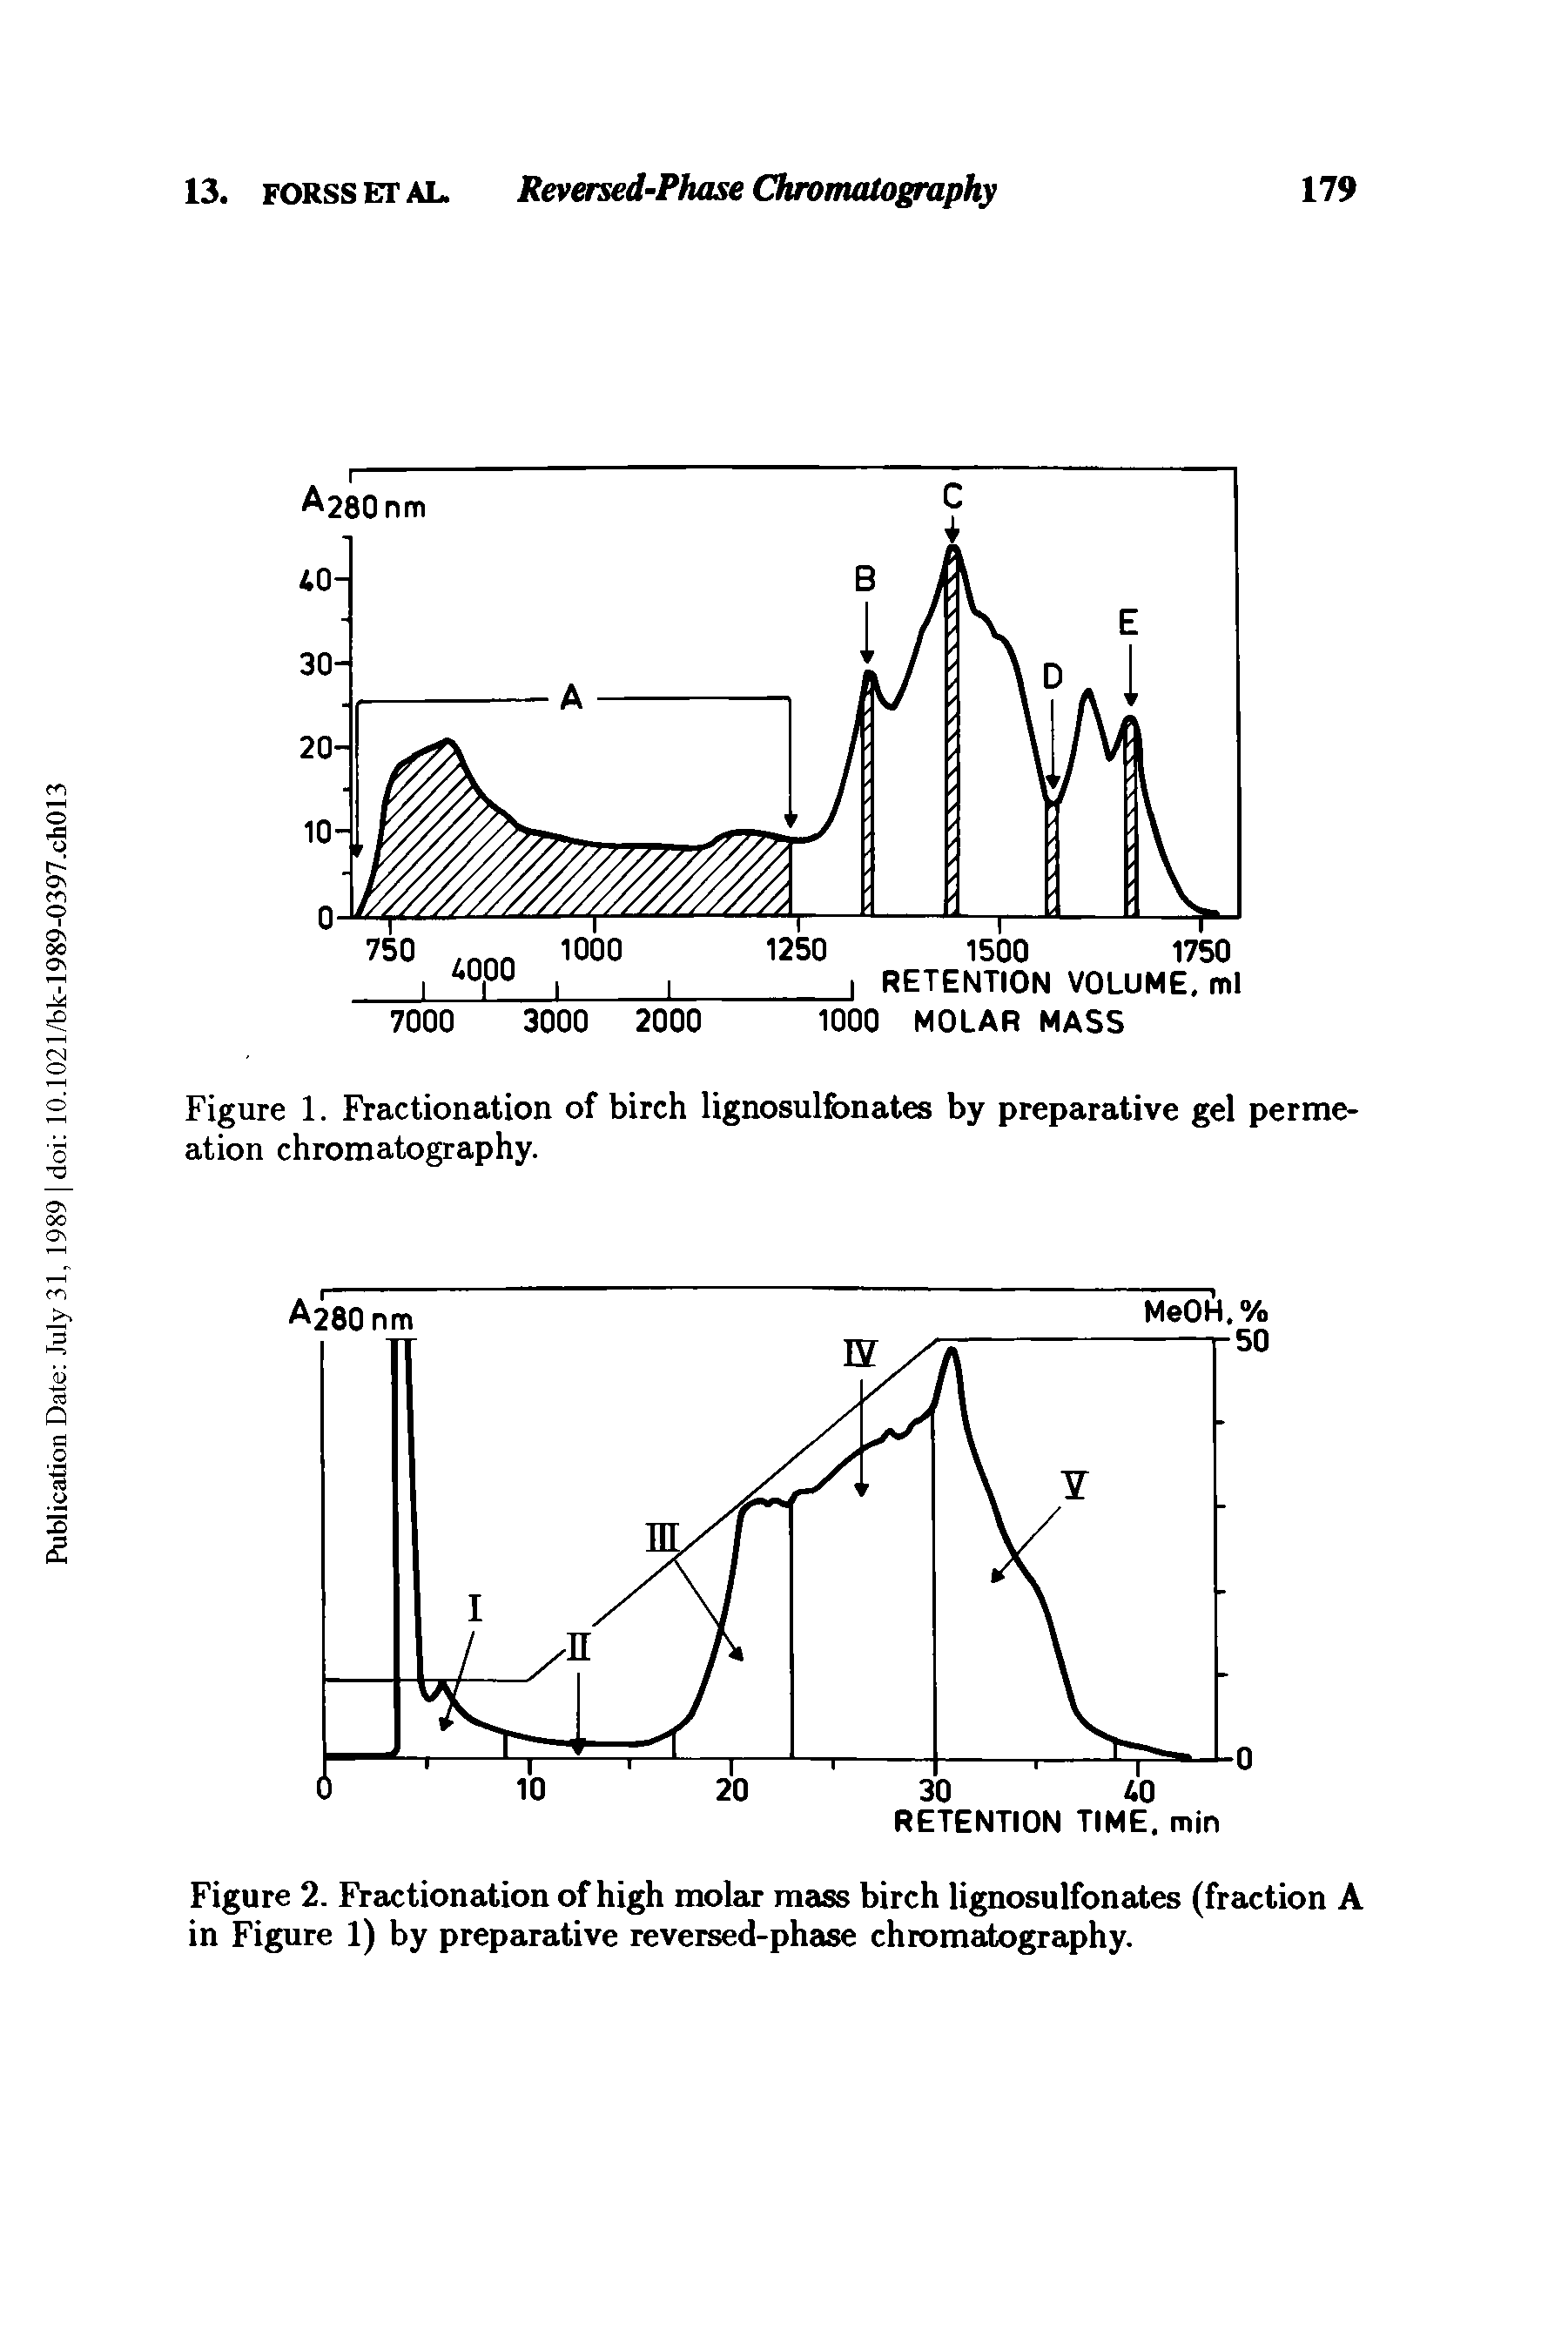 Figure 2. Fractionation of high molar mass birch lignosulfonates (fraction A in Figure 1) by preparative reversed-phase chromatography.